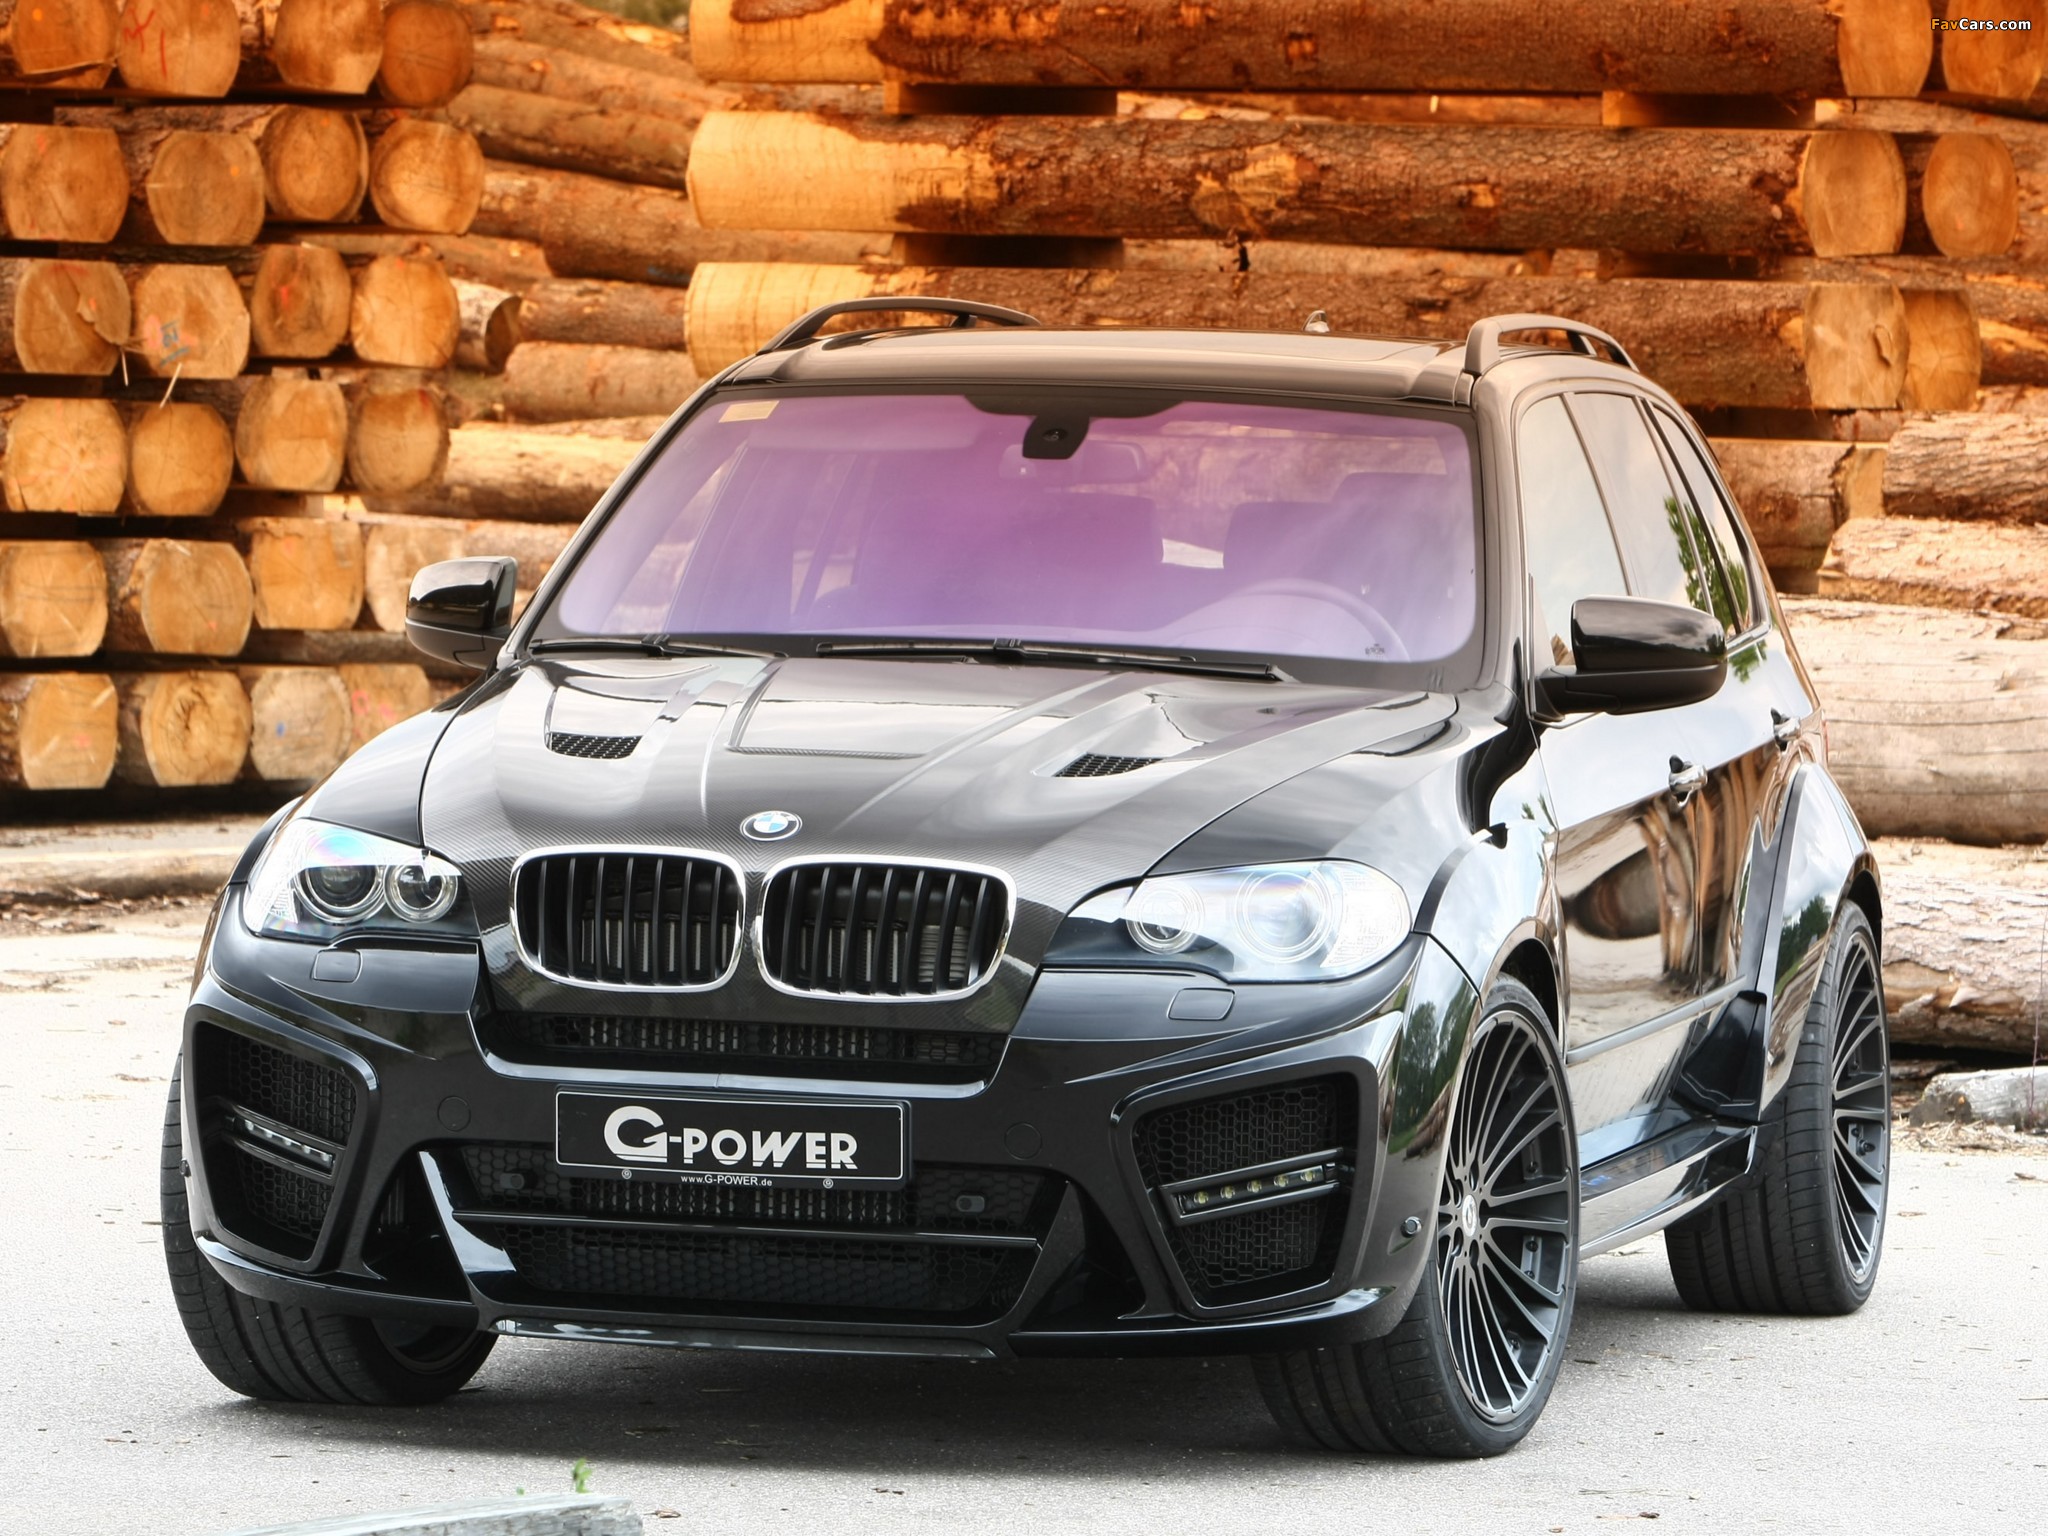 G-Power BMW X5 Typhoon (E70) 2009 pictures (2048 x 1536)